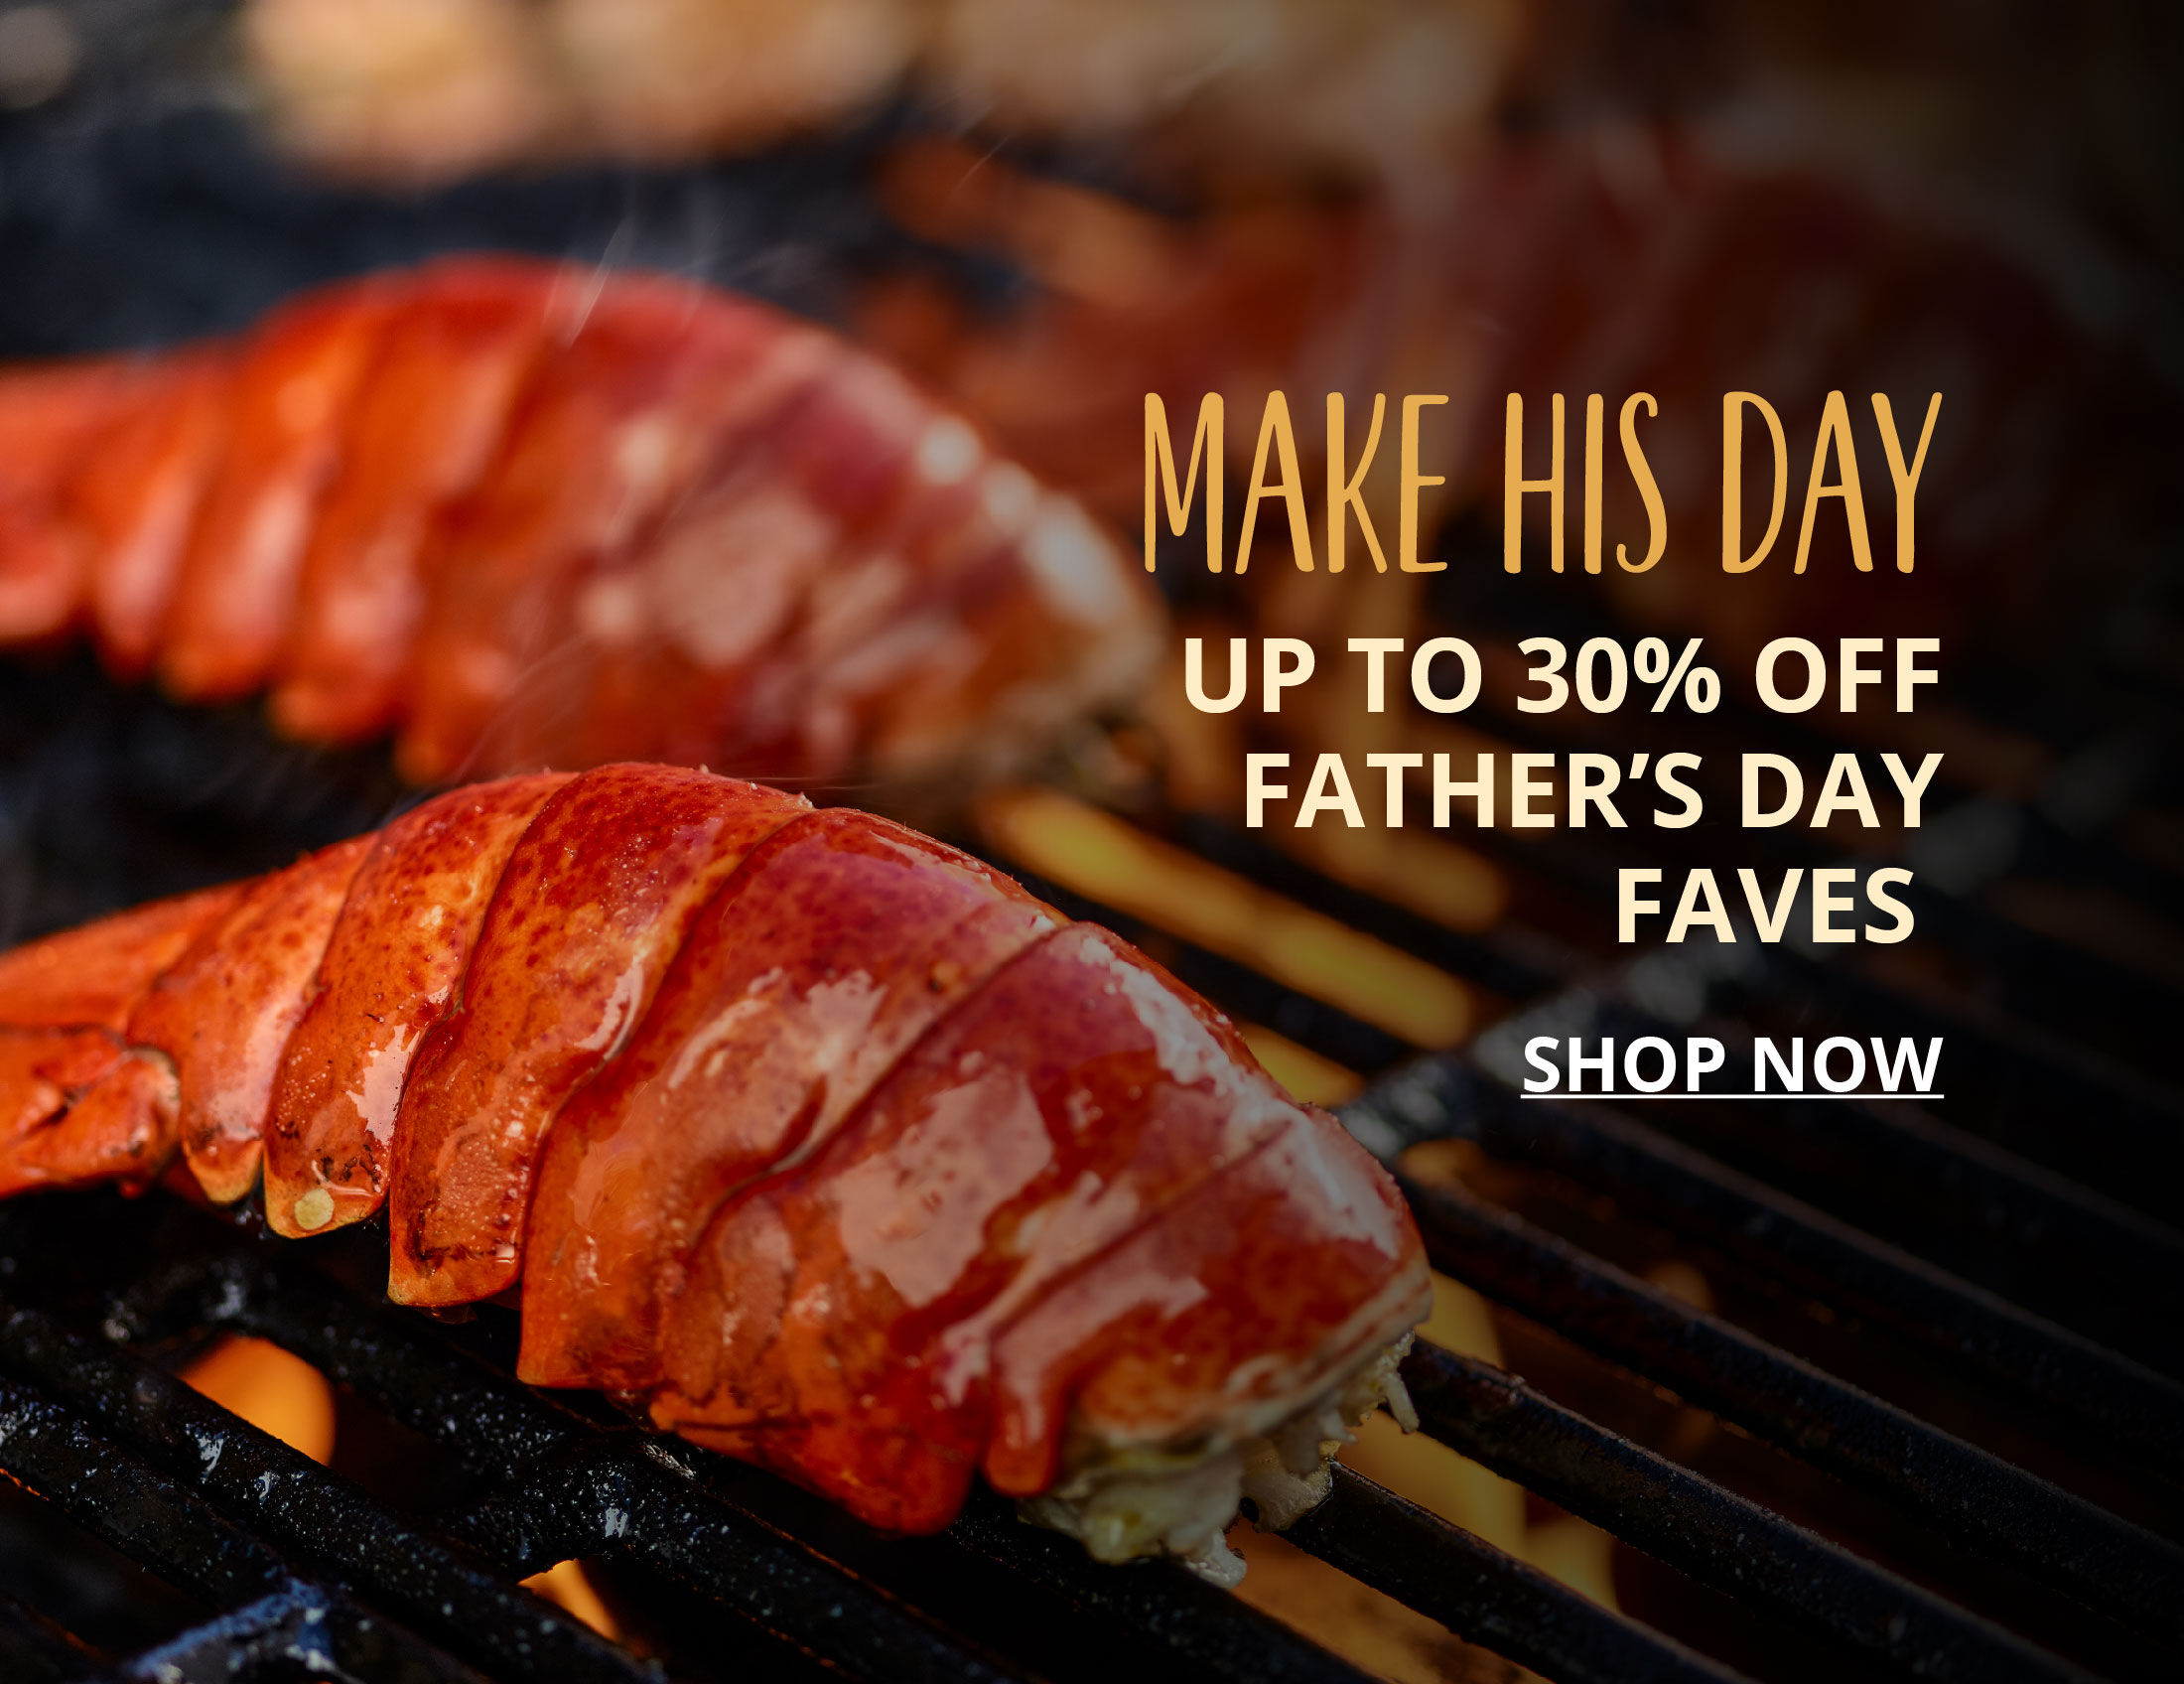 Up to 30% OFF Father’s Day Favorites